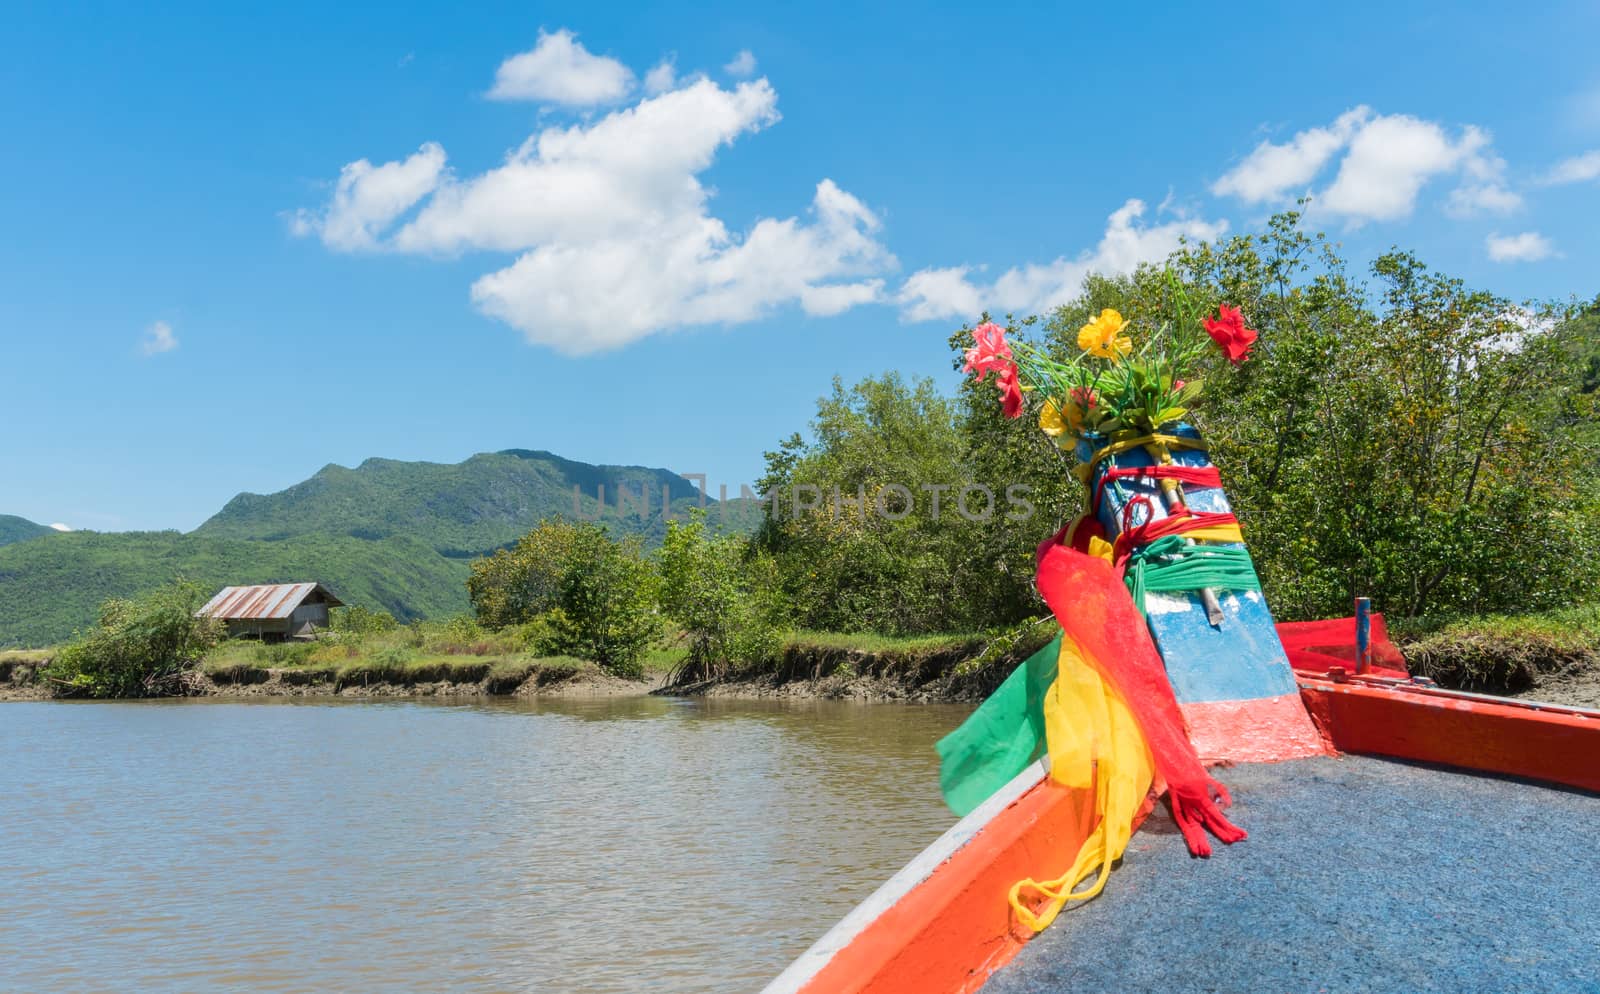 Khao Daeng canal boat trip at Prachuap Khiri Khan Thailand. Boat or fishing boat and rock or stone mountain or hill with blue sky and cloud and green tree and water. Landscape or scenery summer concept for boat trip